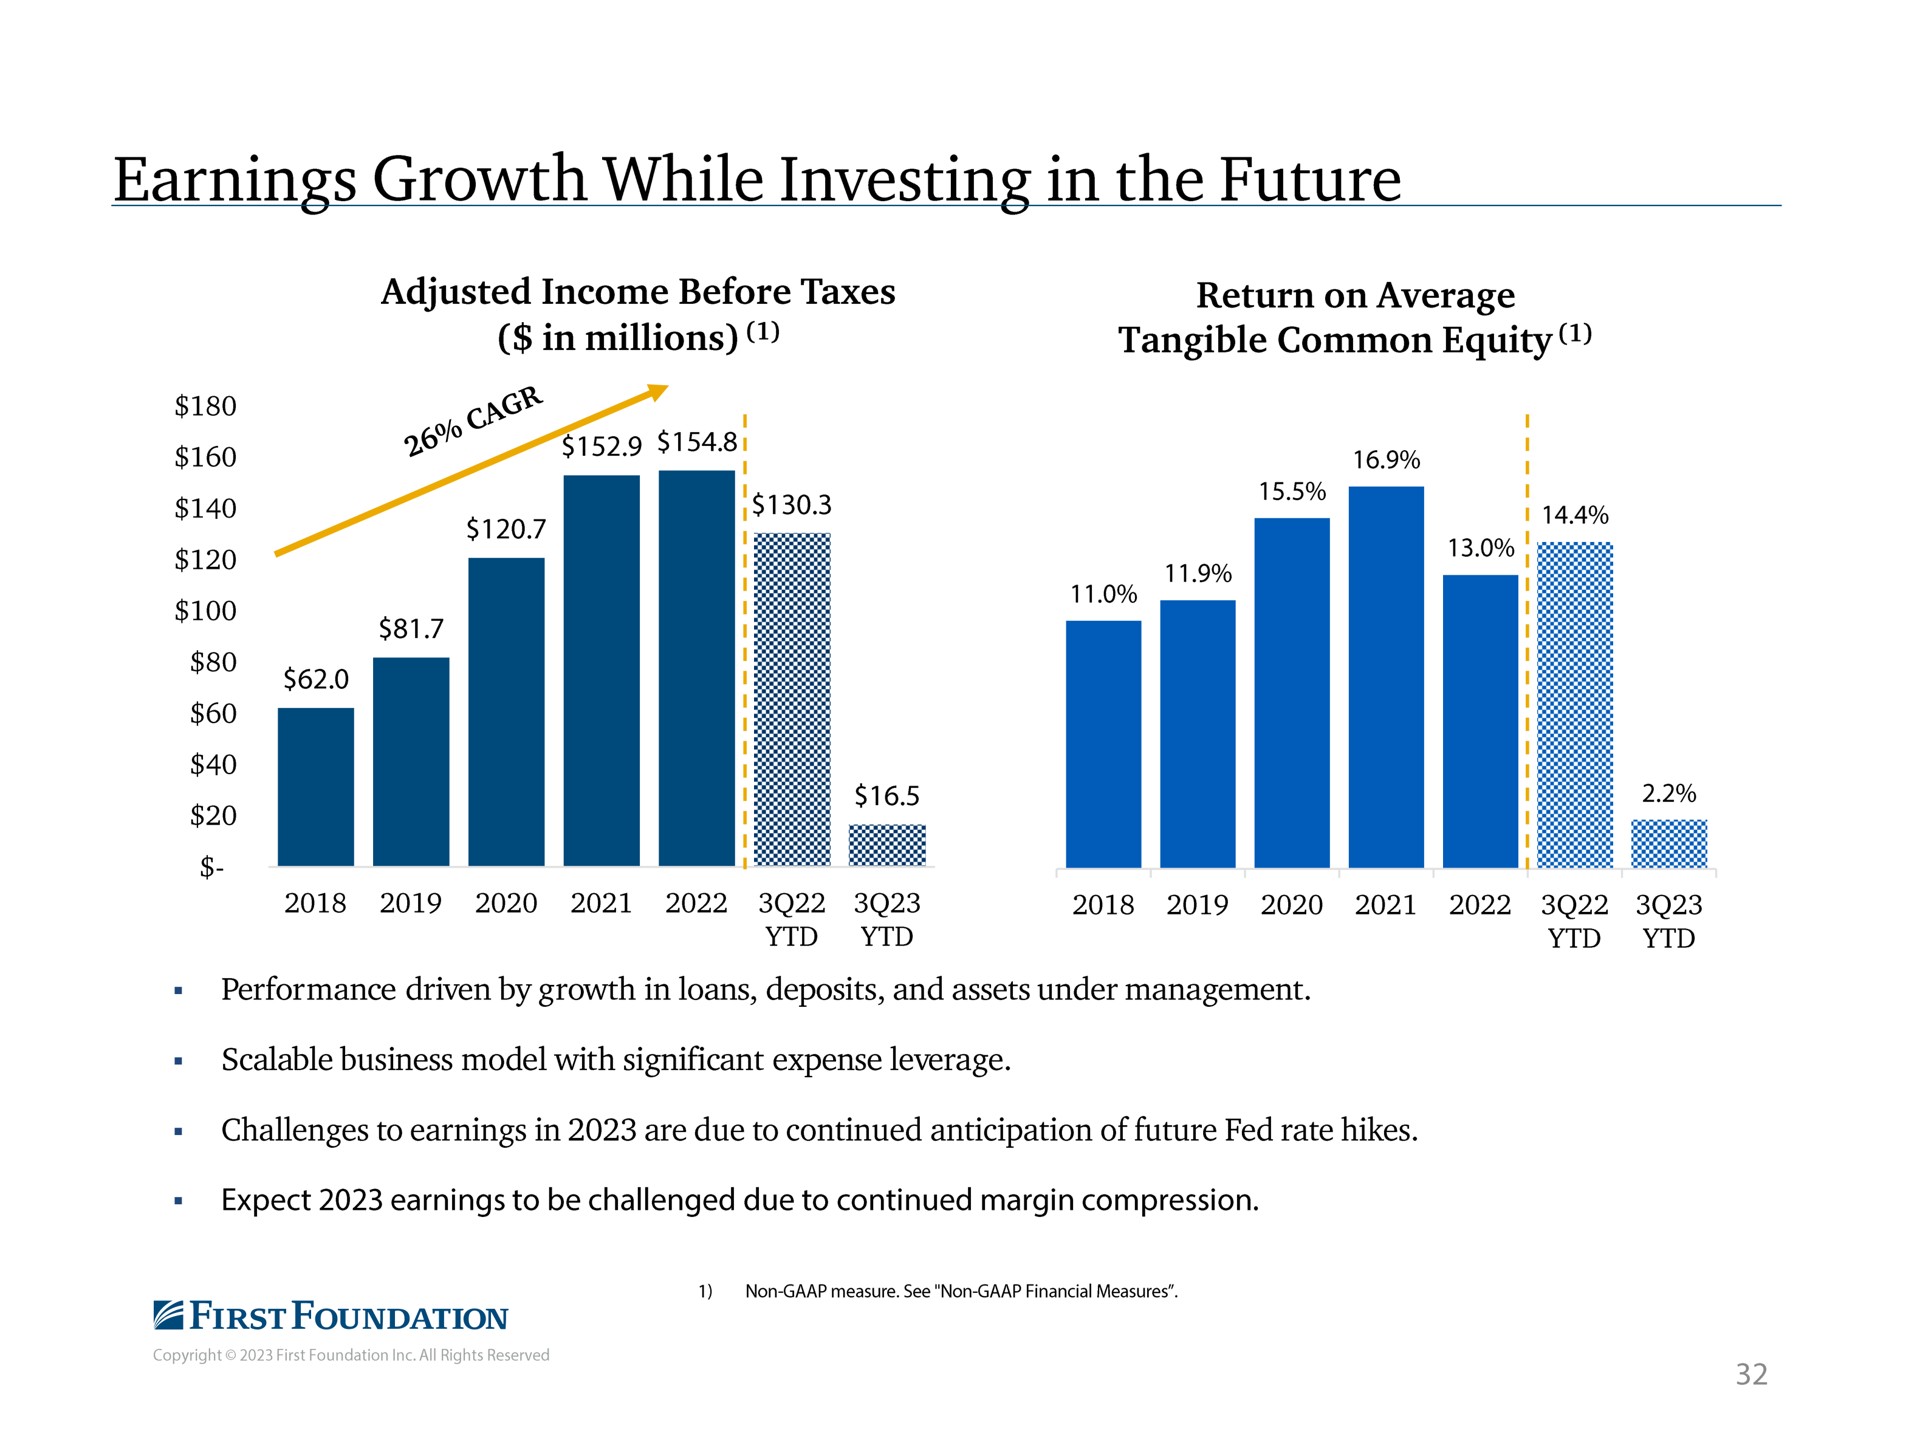 earnings growth while investing in the future return on average tangible common equity | First Foundation